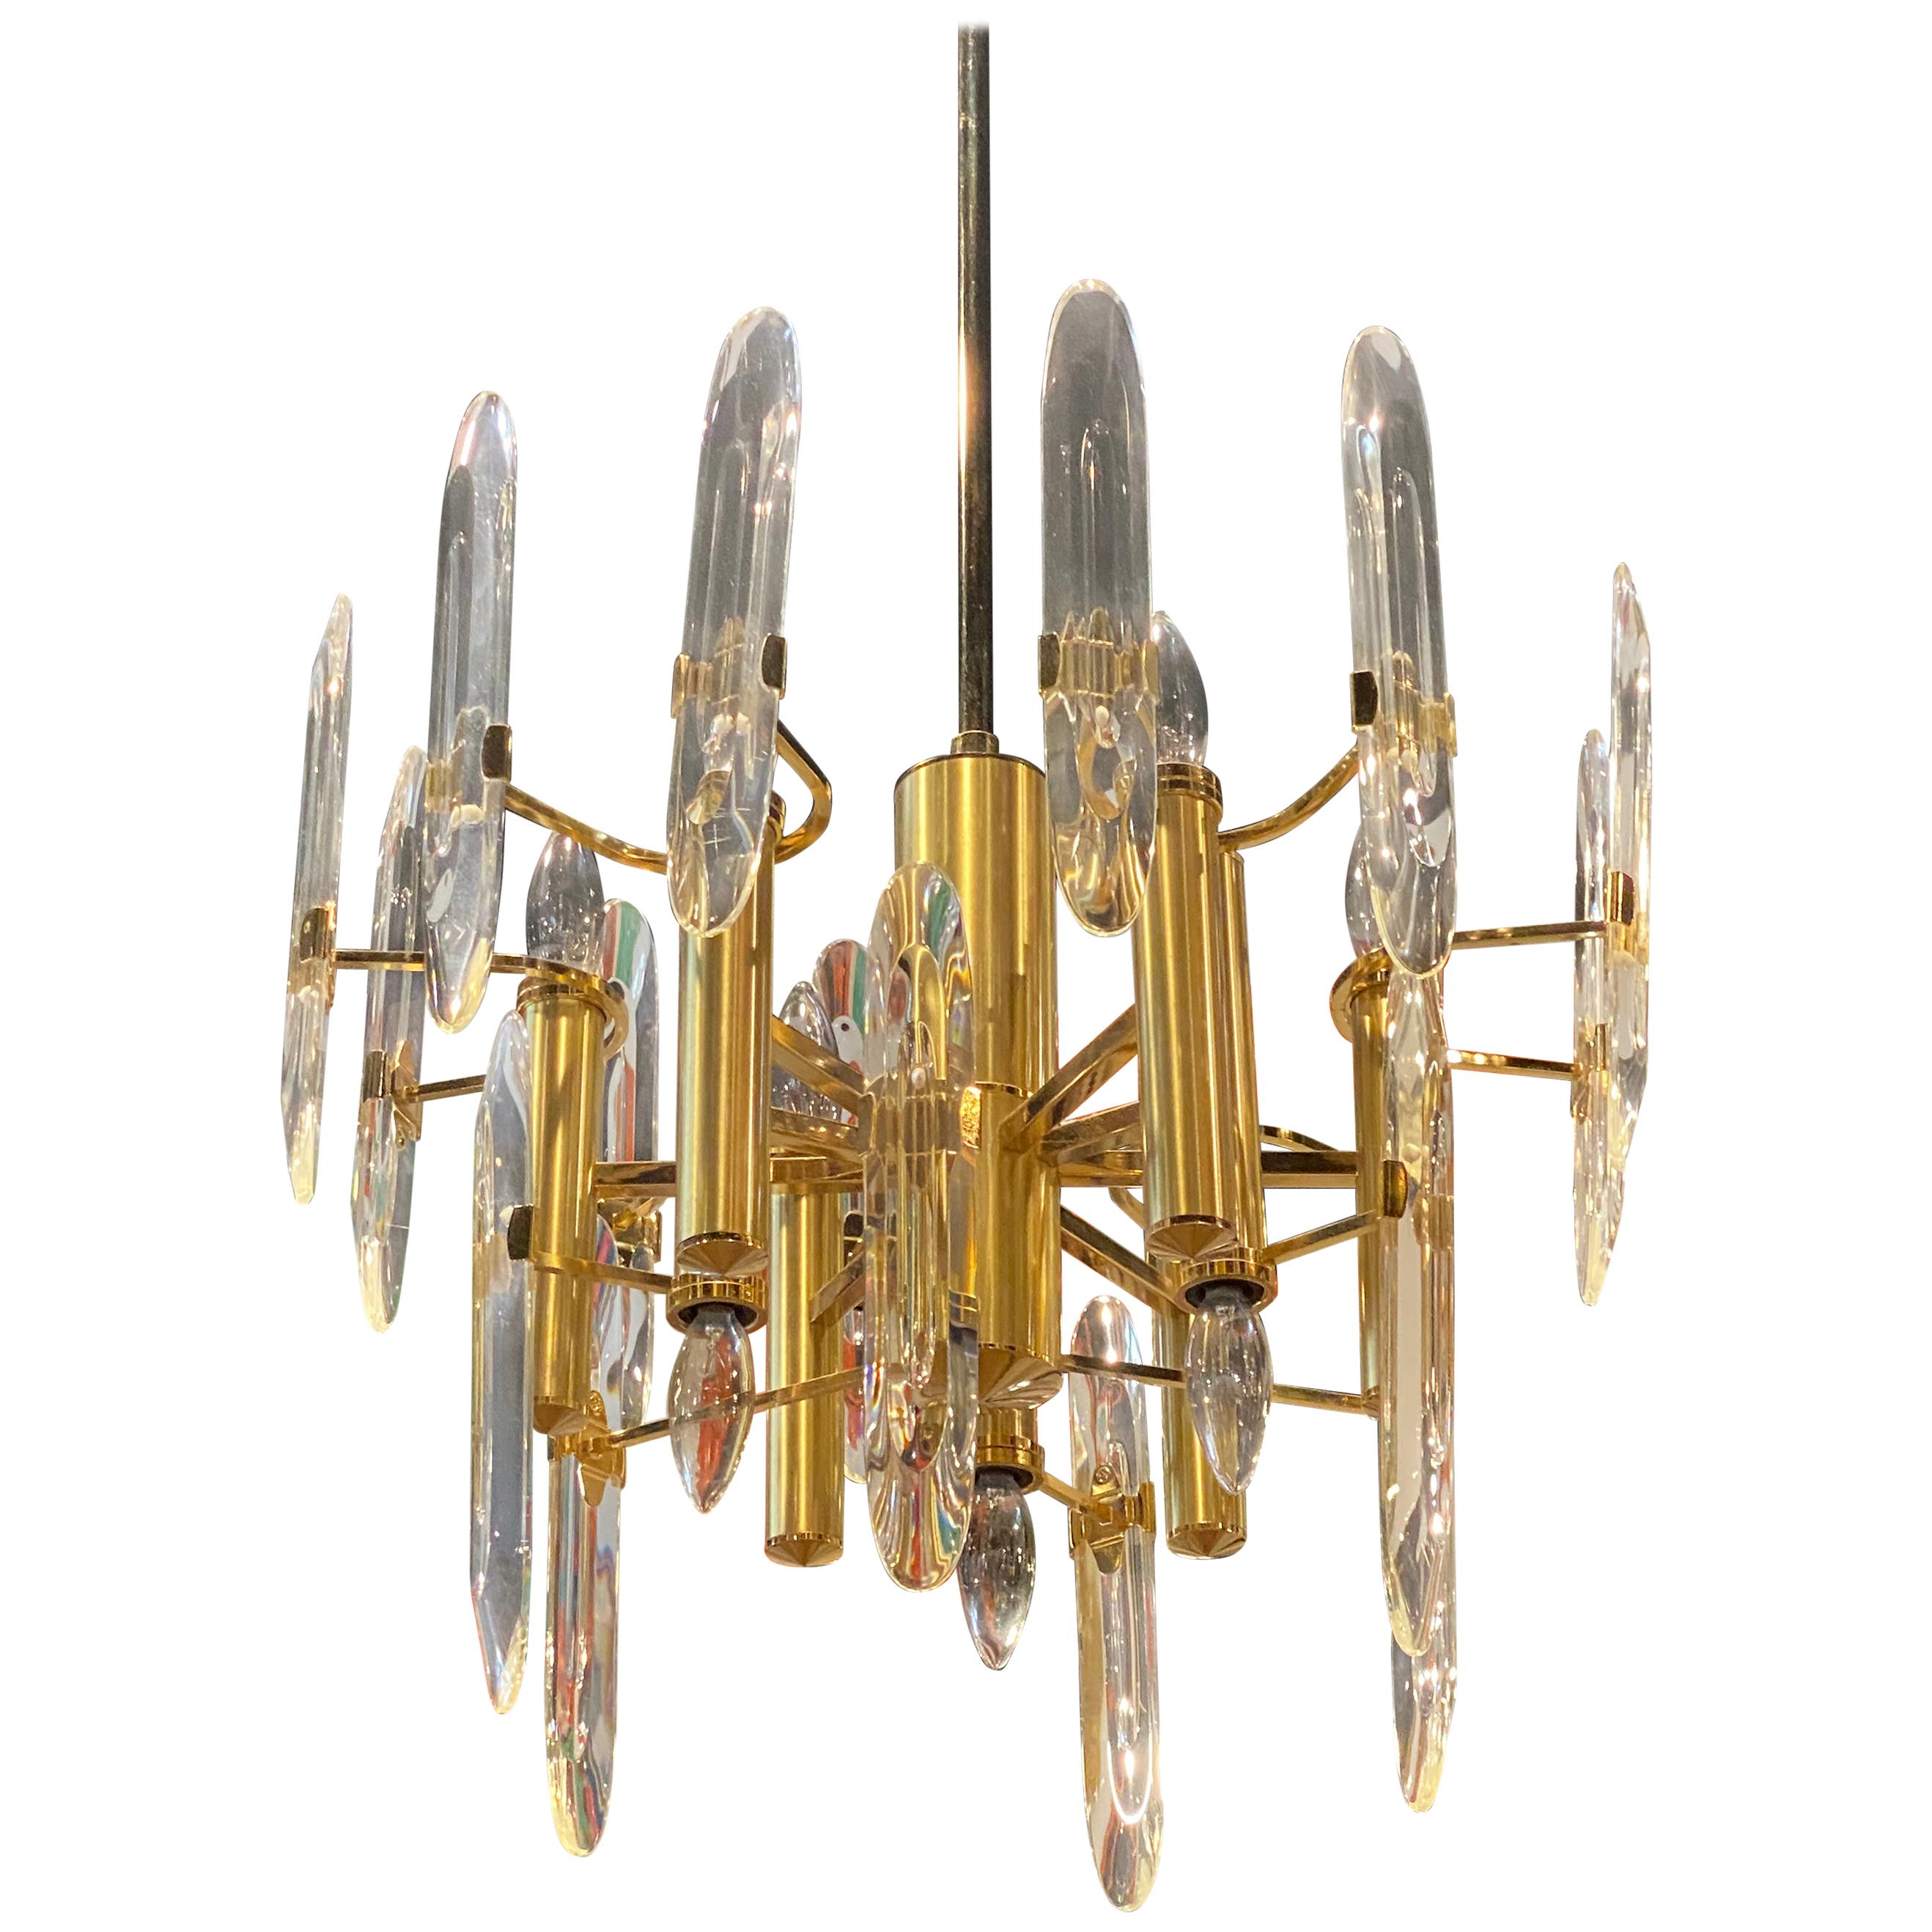 Vintage Hollywood Regency Sciolari Brass and Glass Chandelier Pair Available